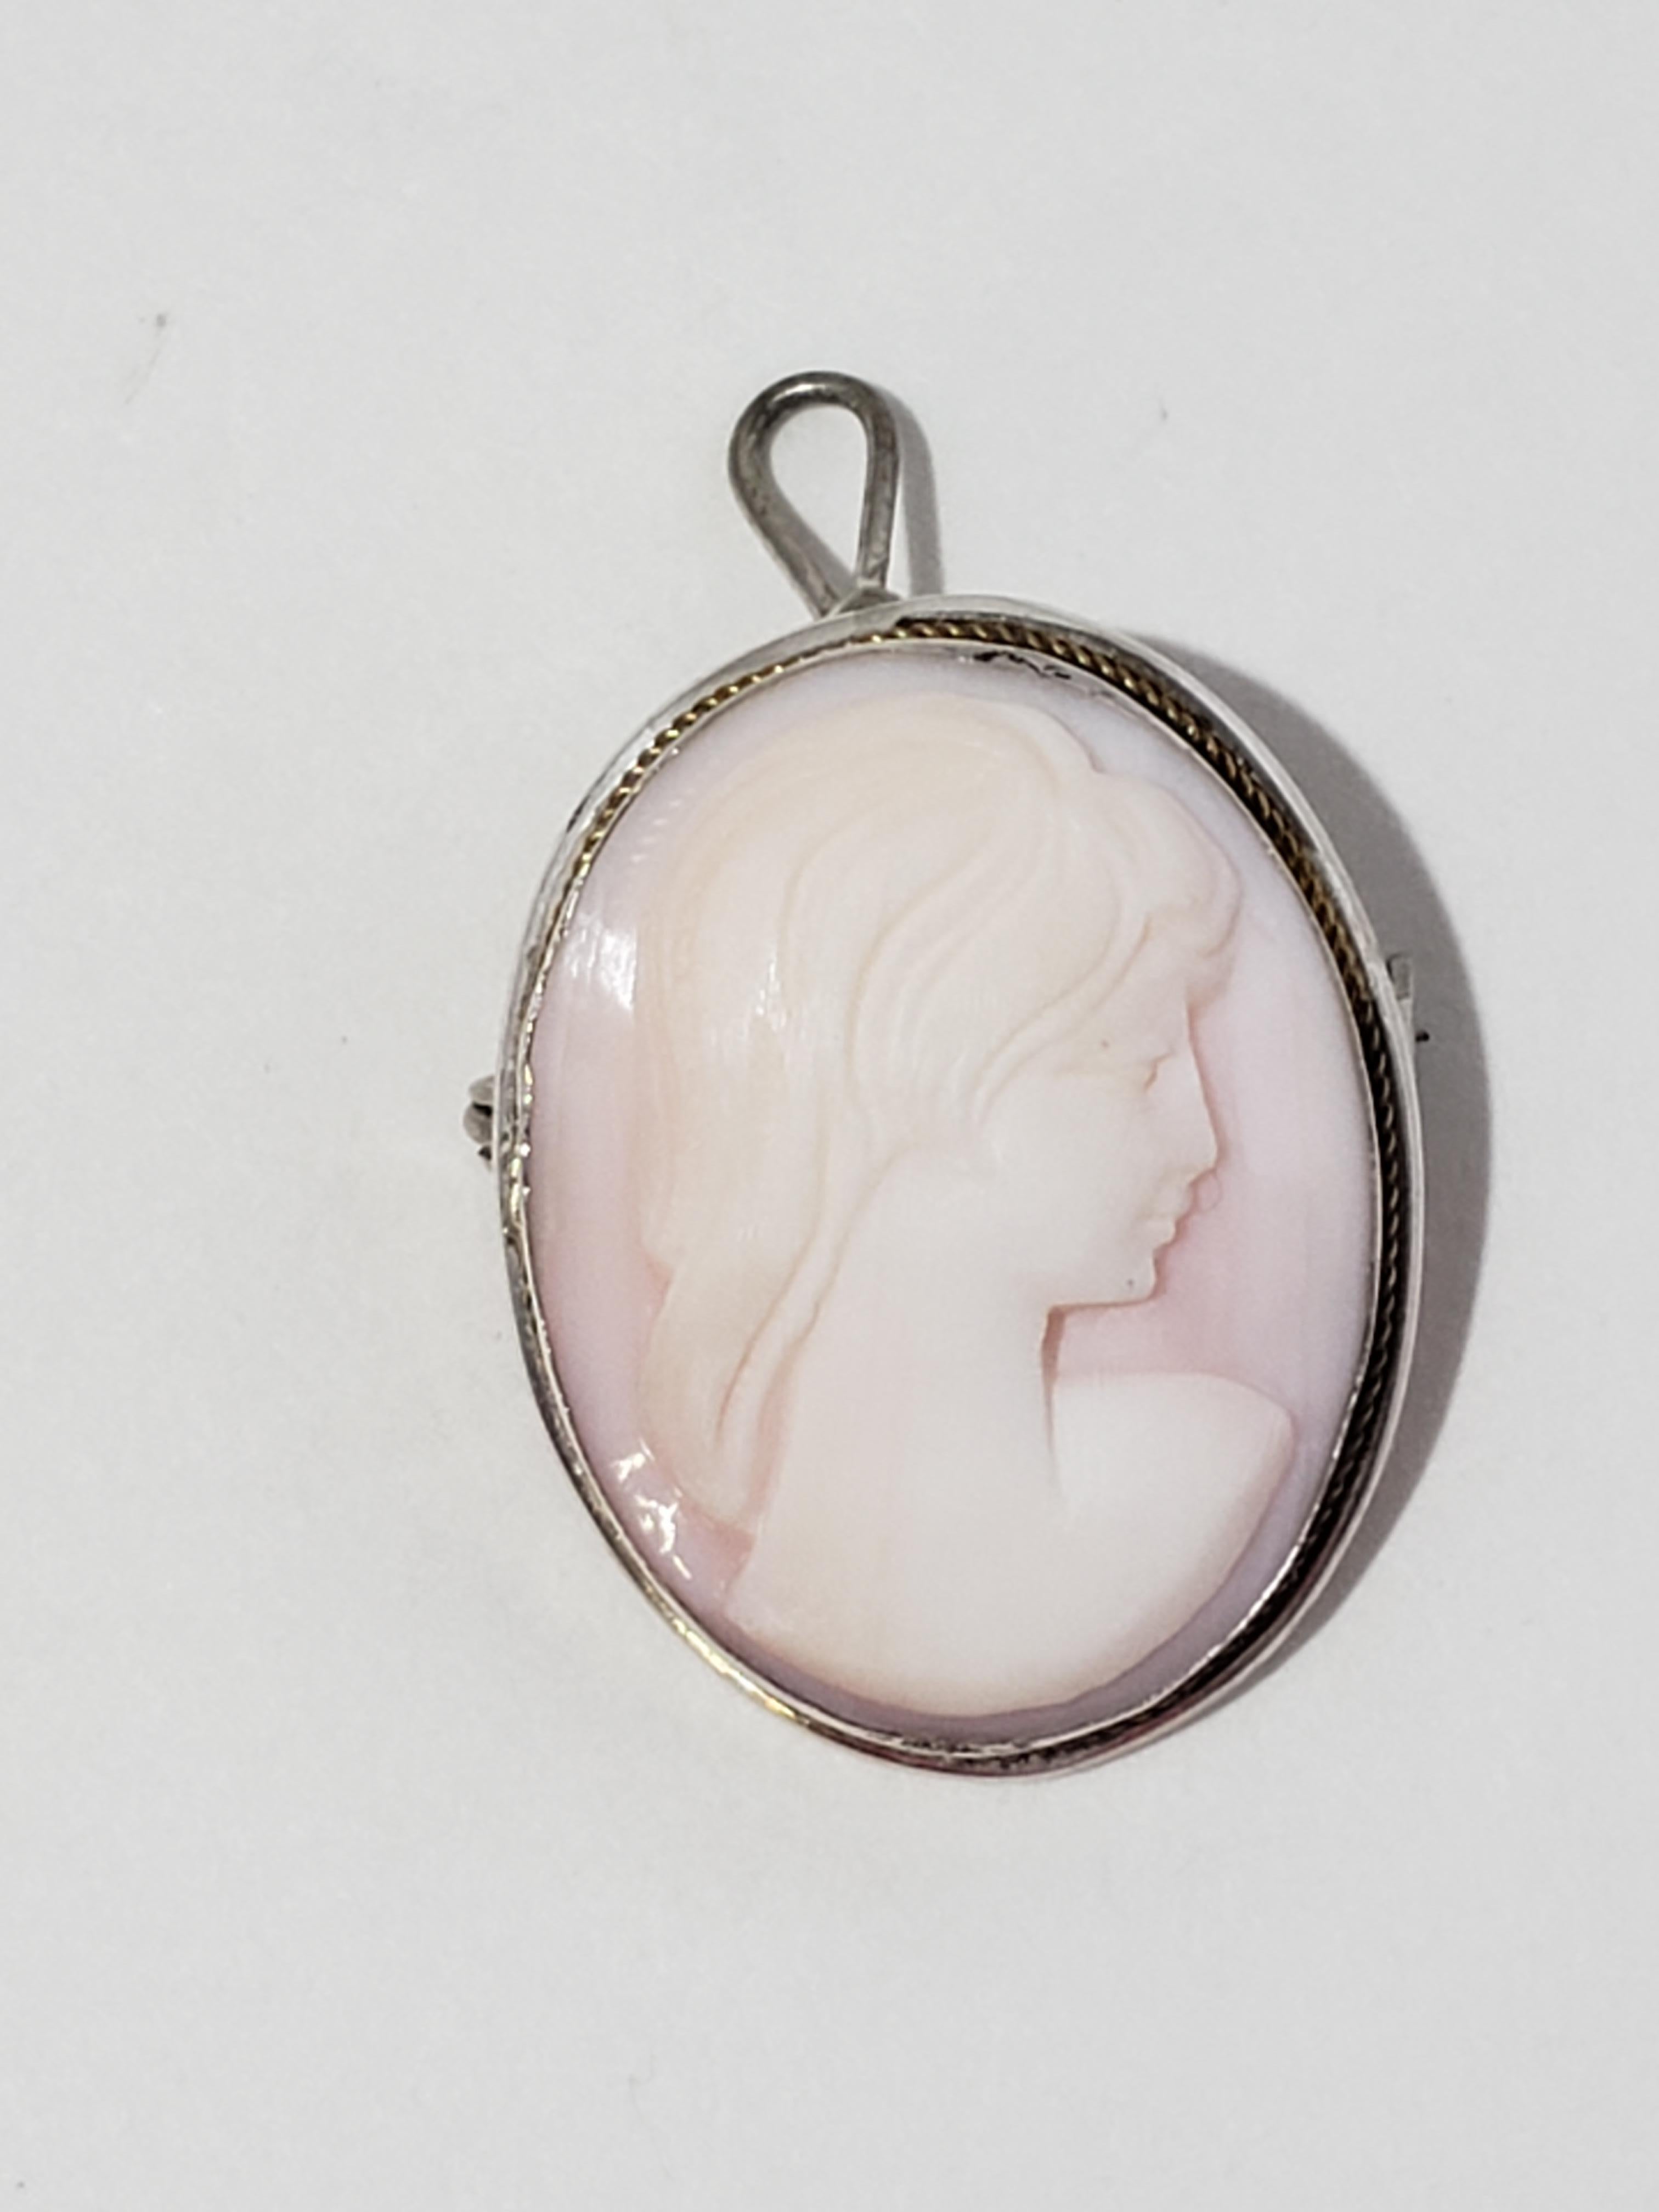 800 Sterling Silver Shell Cameo Brooch Pendant

Beautifully detailed hand carved shell cameo with a lovely woman's face. The silver frame has a simple setting that gives it style. Brooch backs as well as pendant, so it is very versatile.